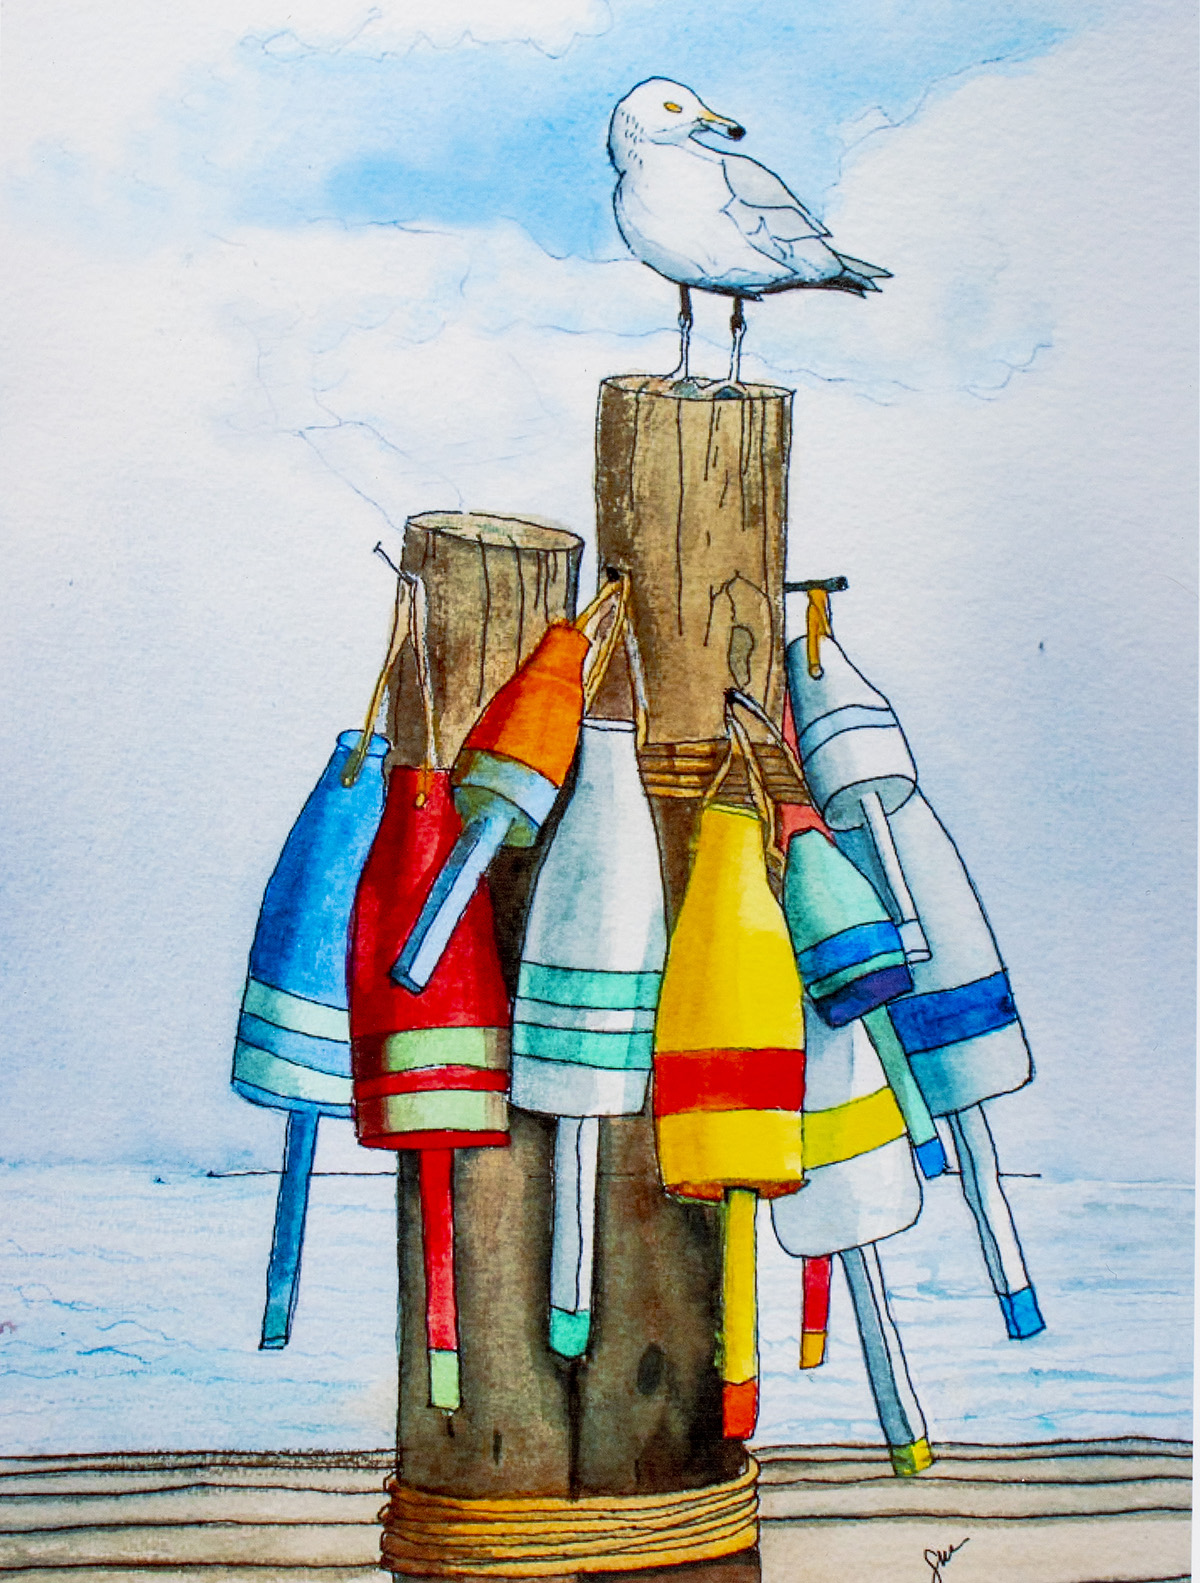 Pirate's Treasure Painting Print Buoys and Seagull